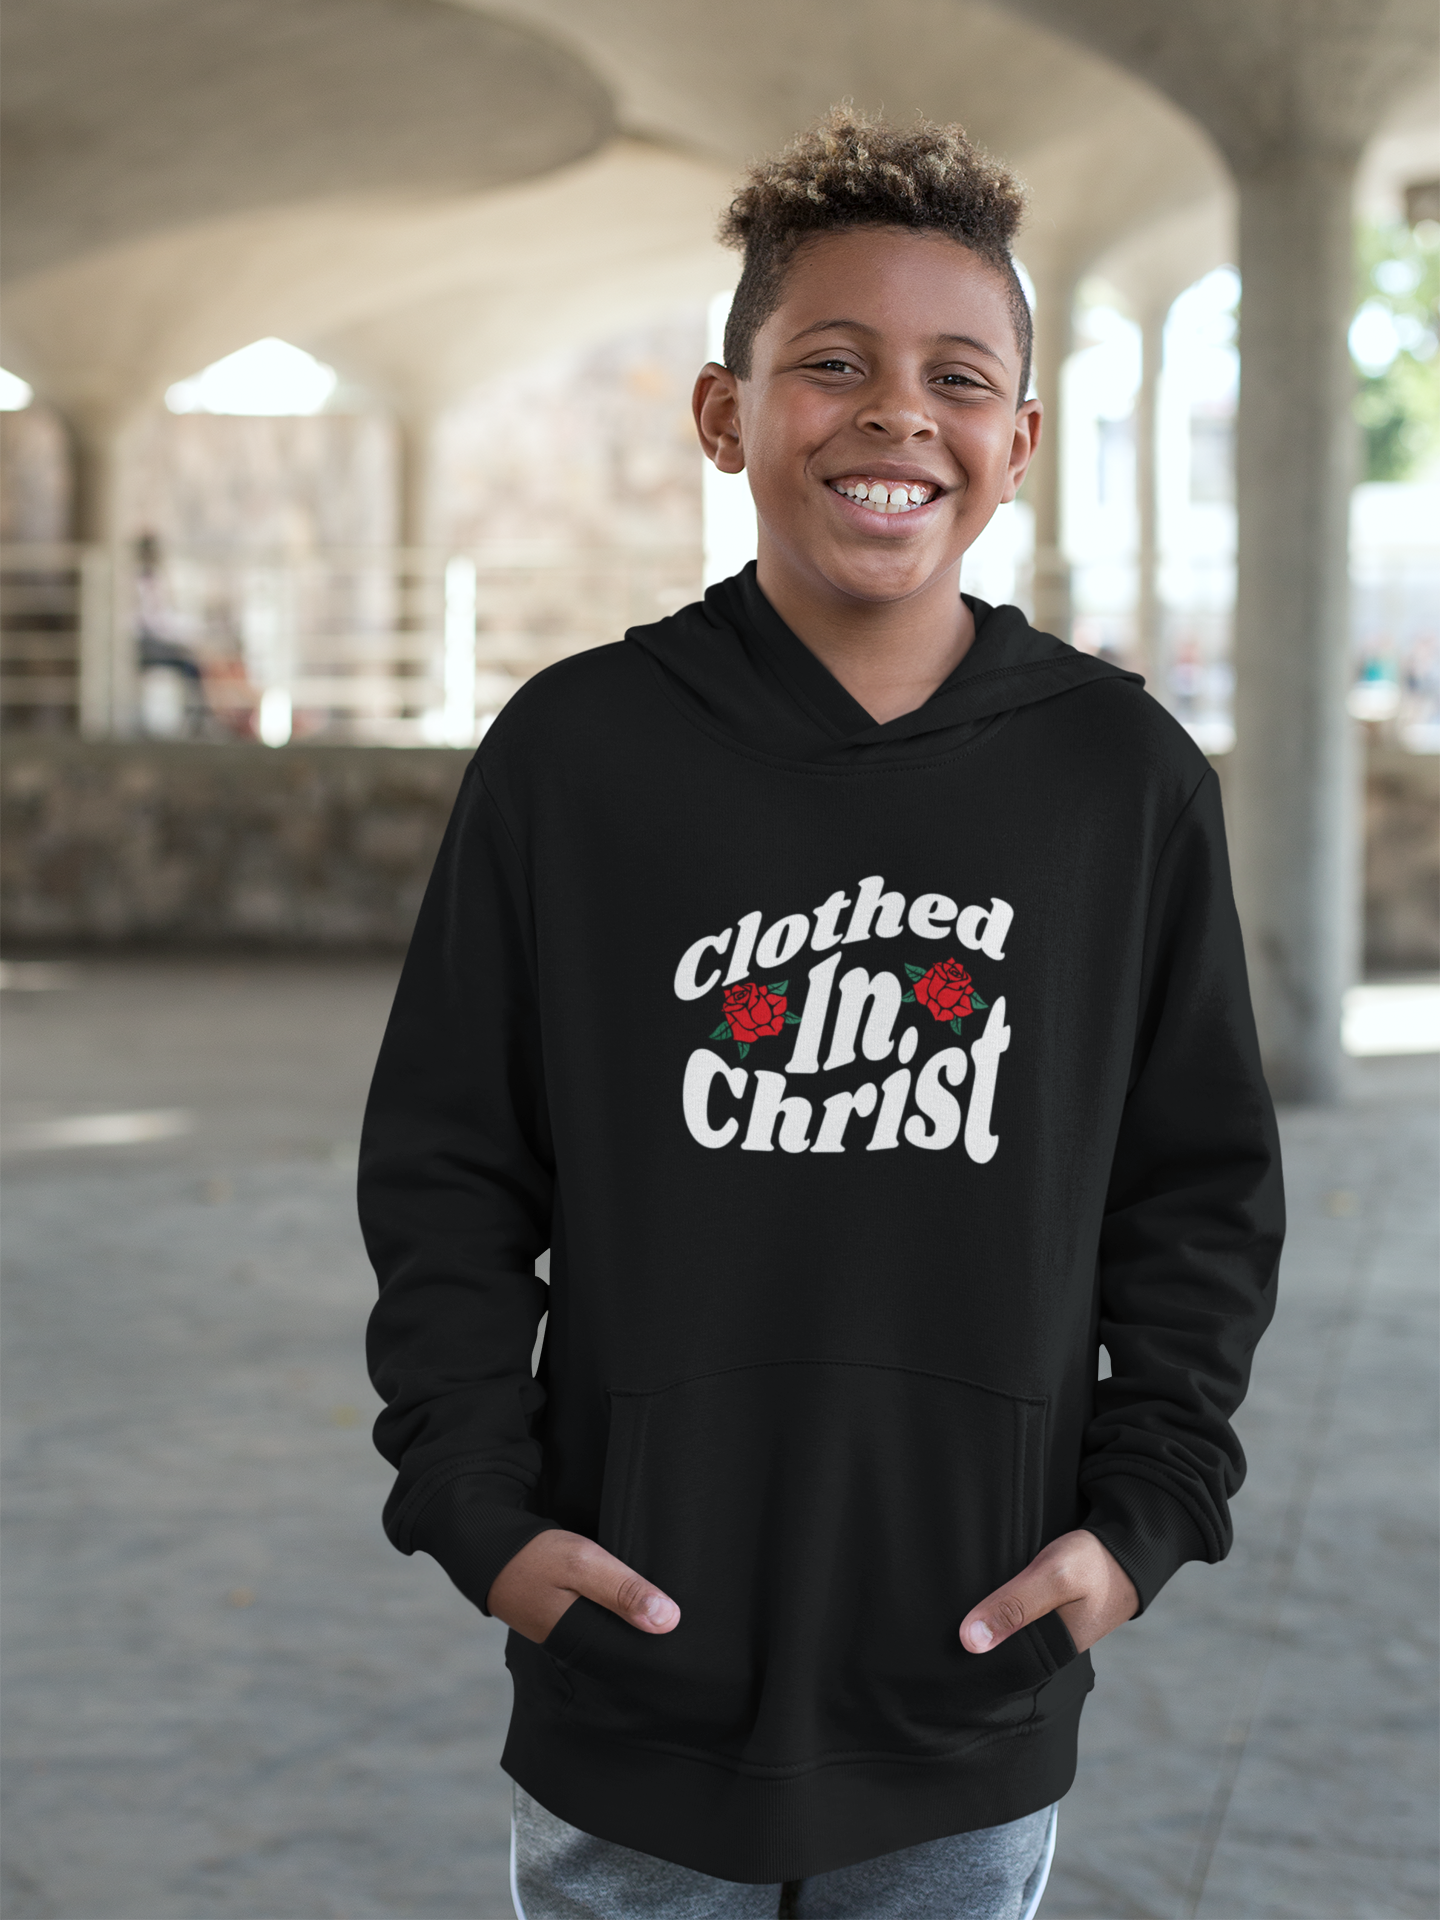 Youth Collection Clothed In Christ Hoodie